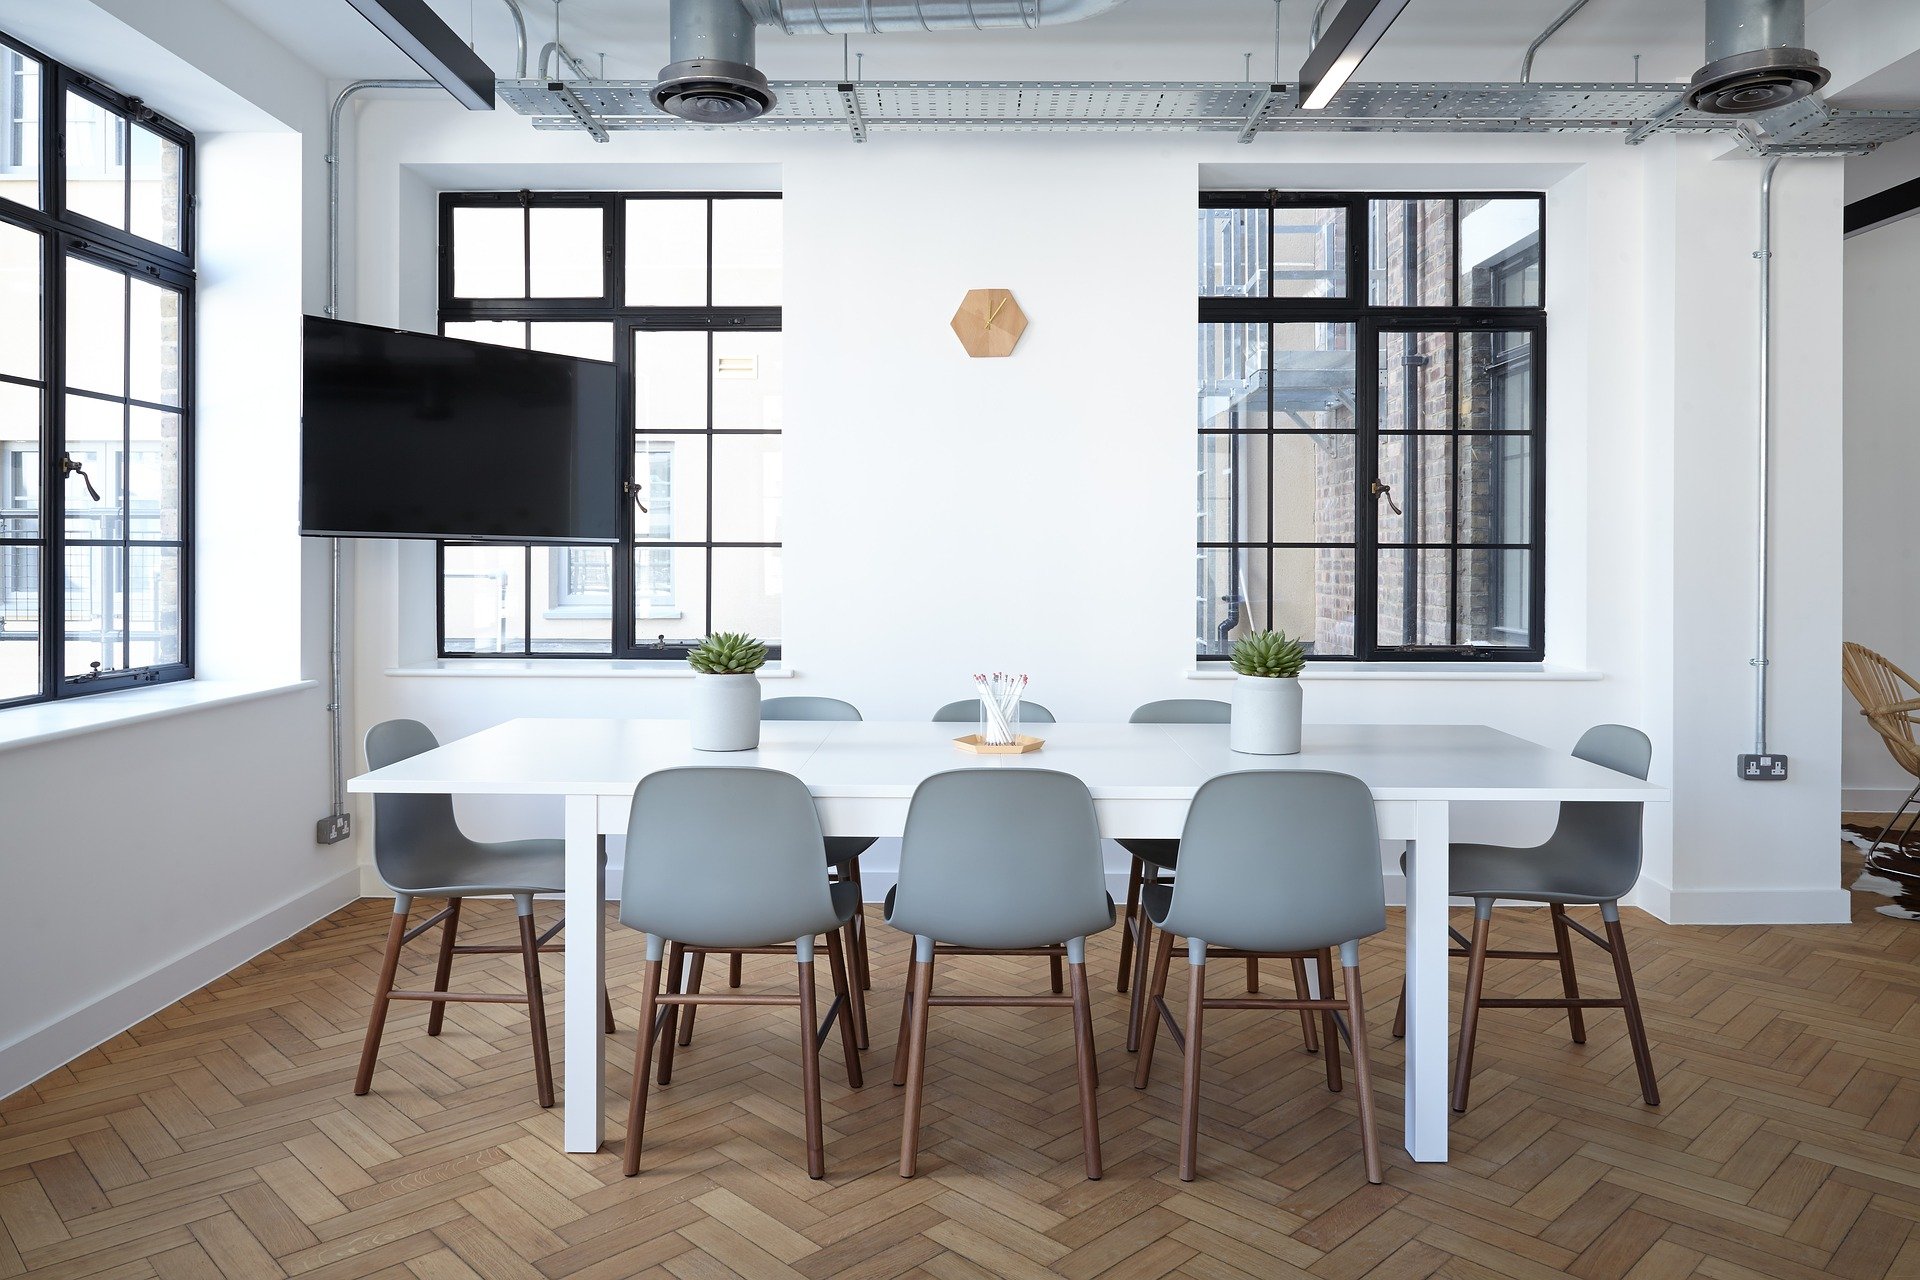 Bright office with a white table in the middle of it and grey chairs around the table